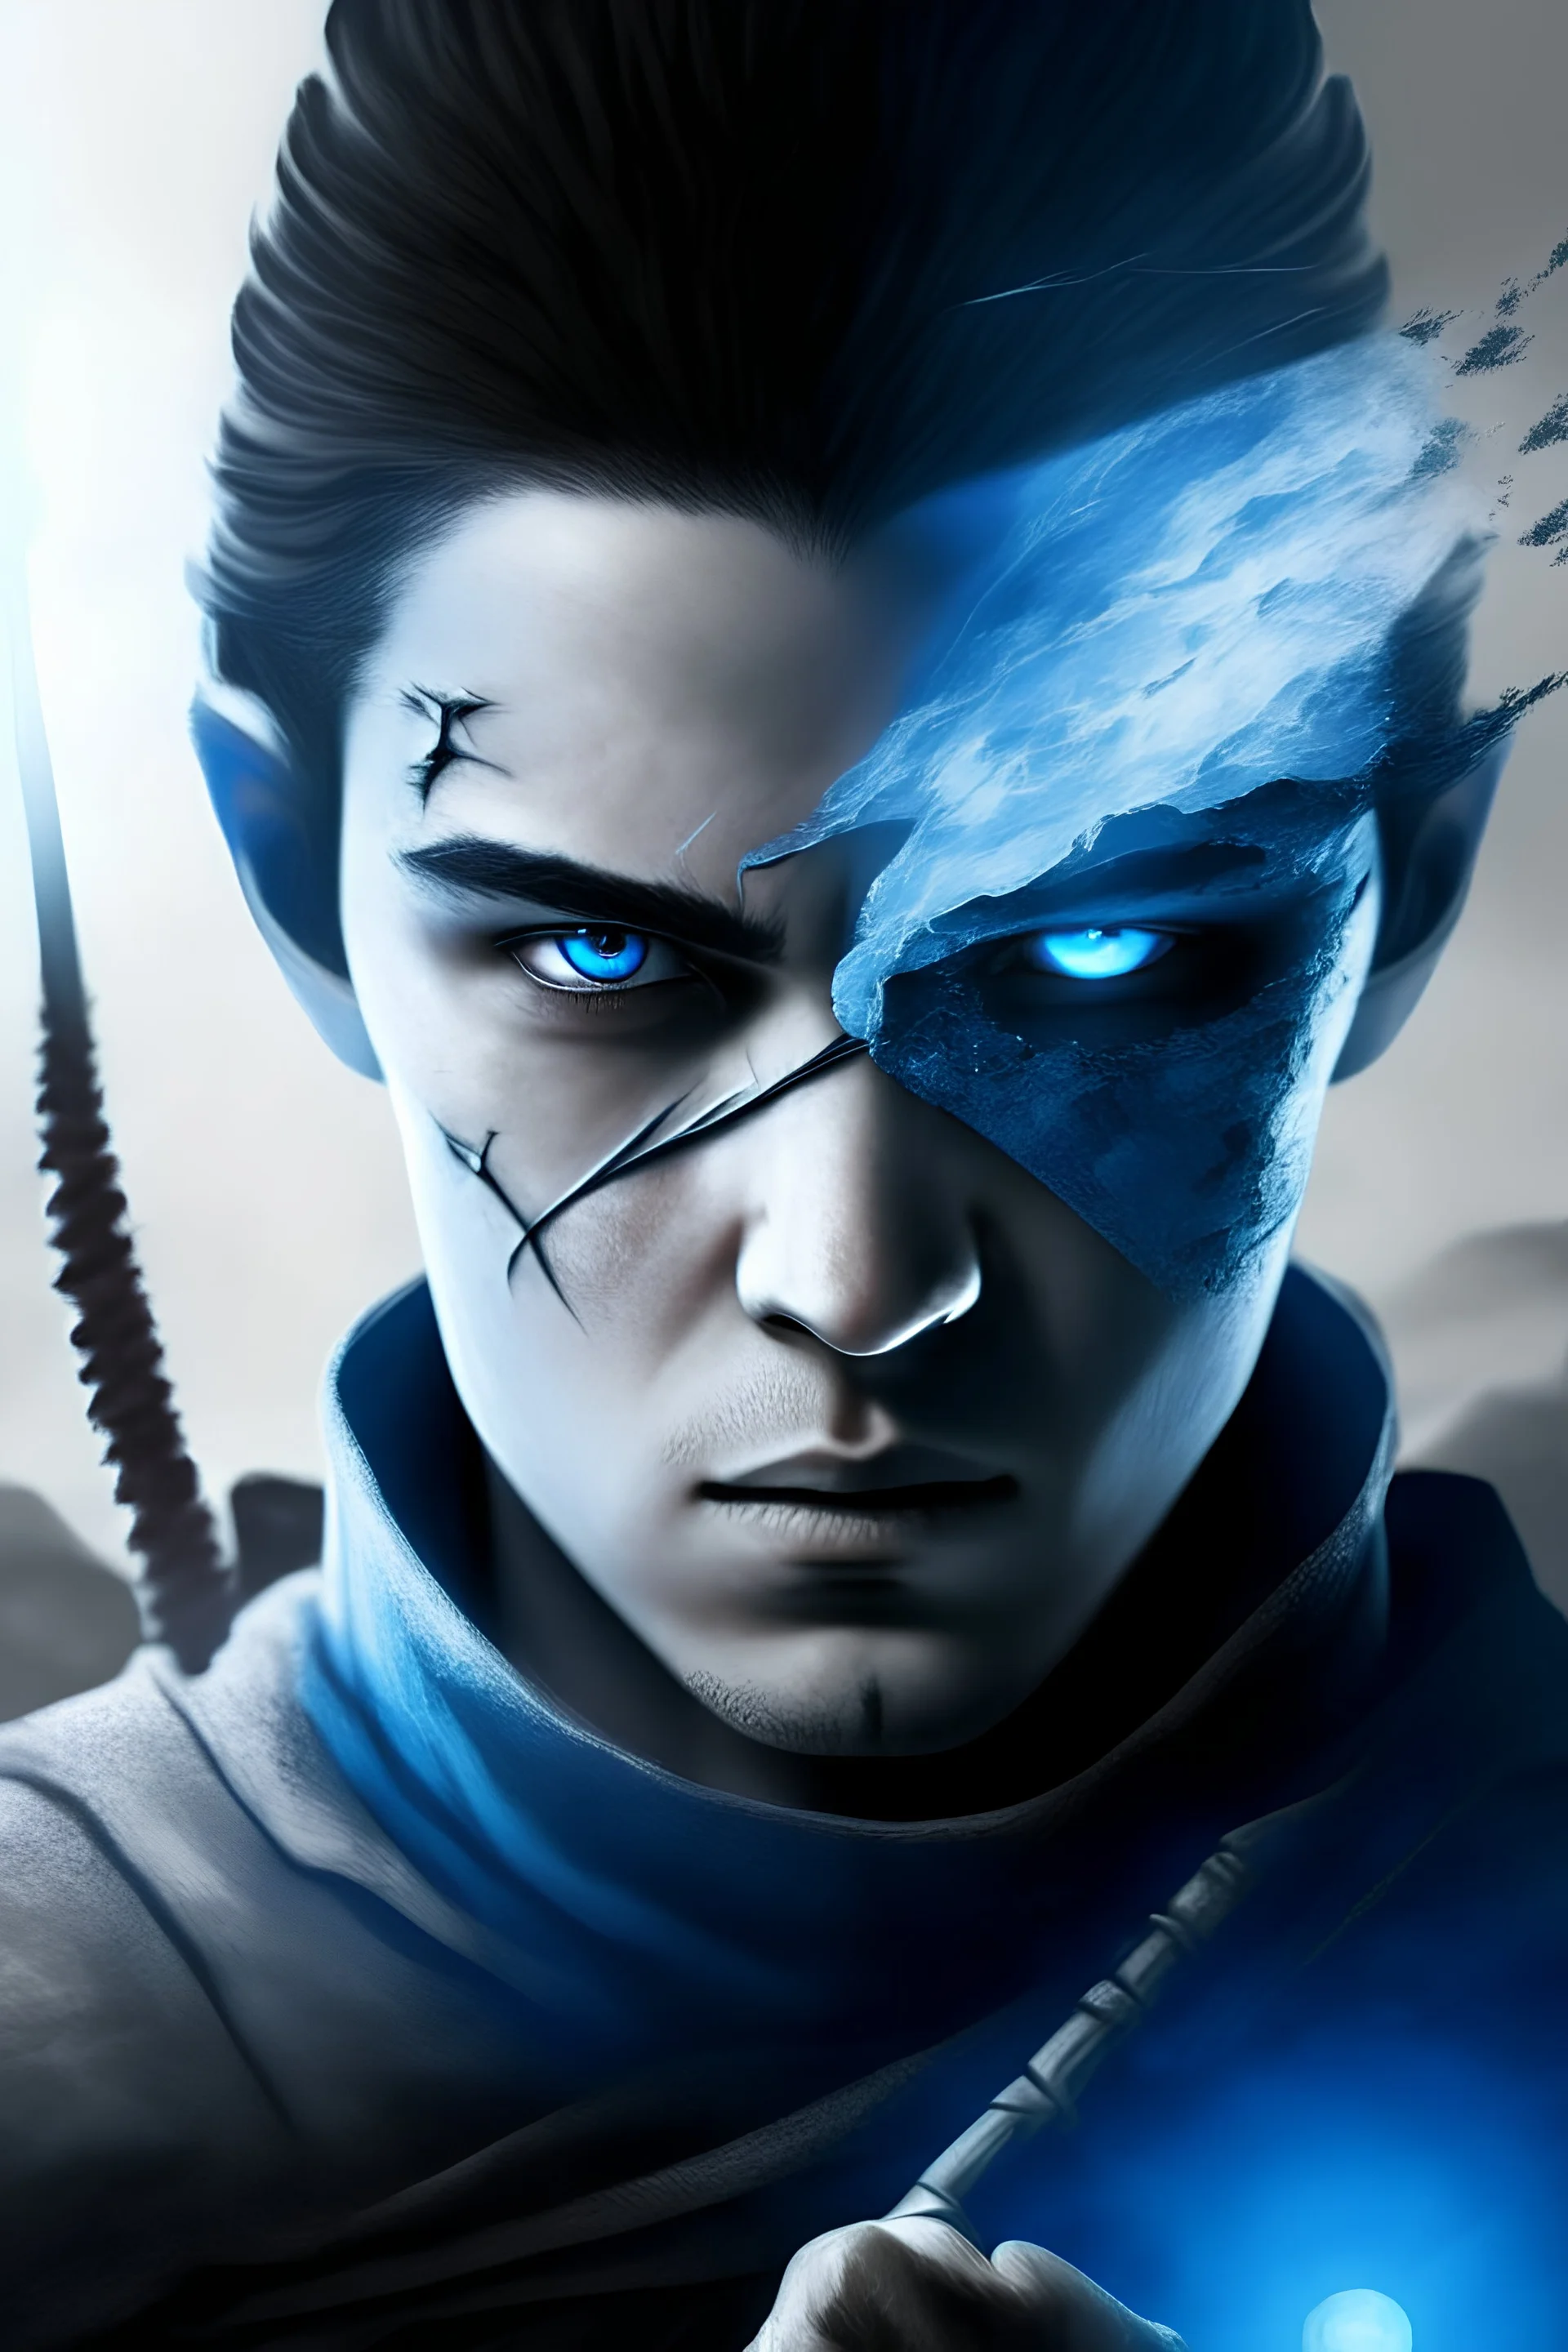 a medival young man cursed with demon blue ice scale like skin around his eye and a demon eye, half of a face altered, whole character